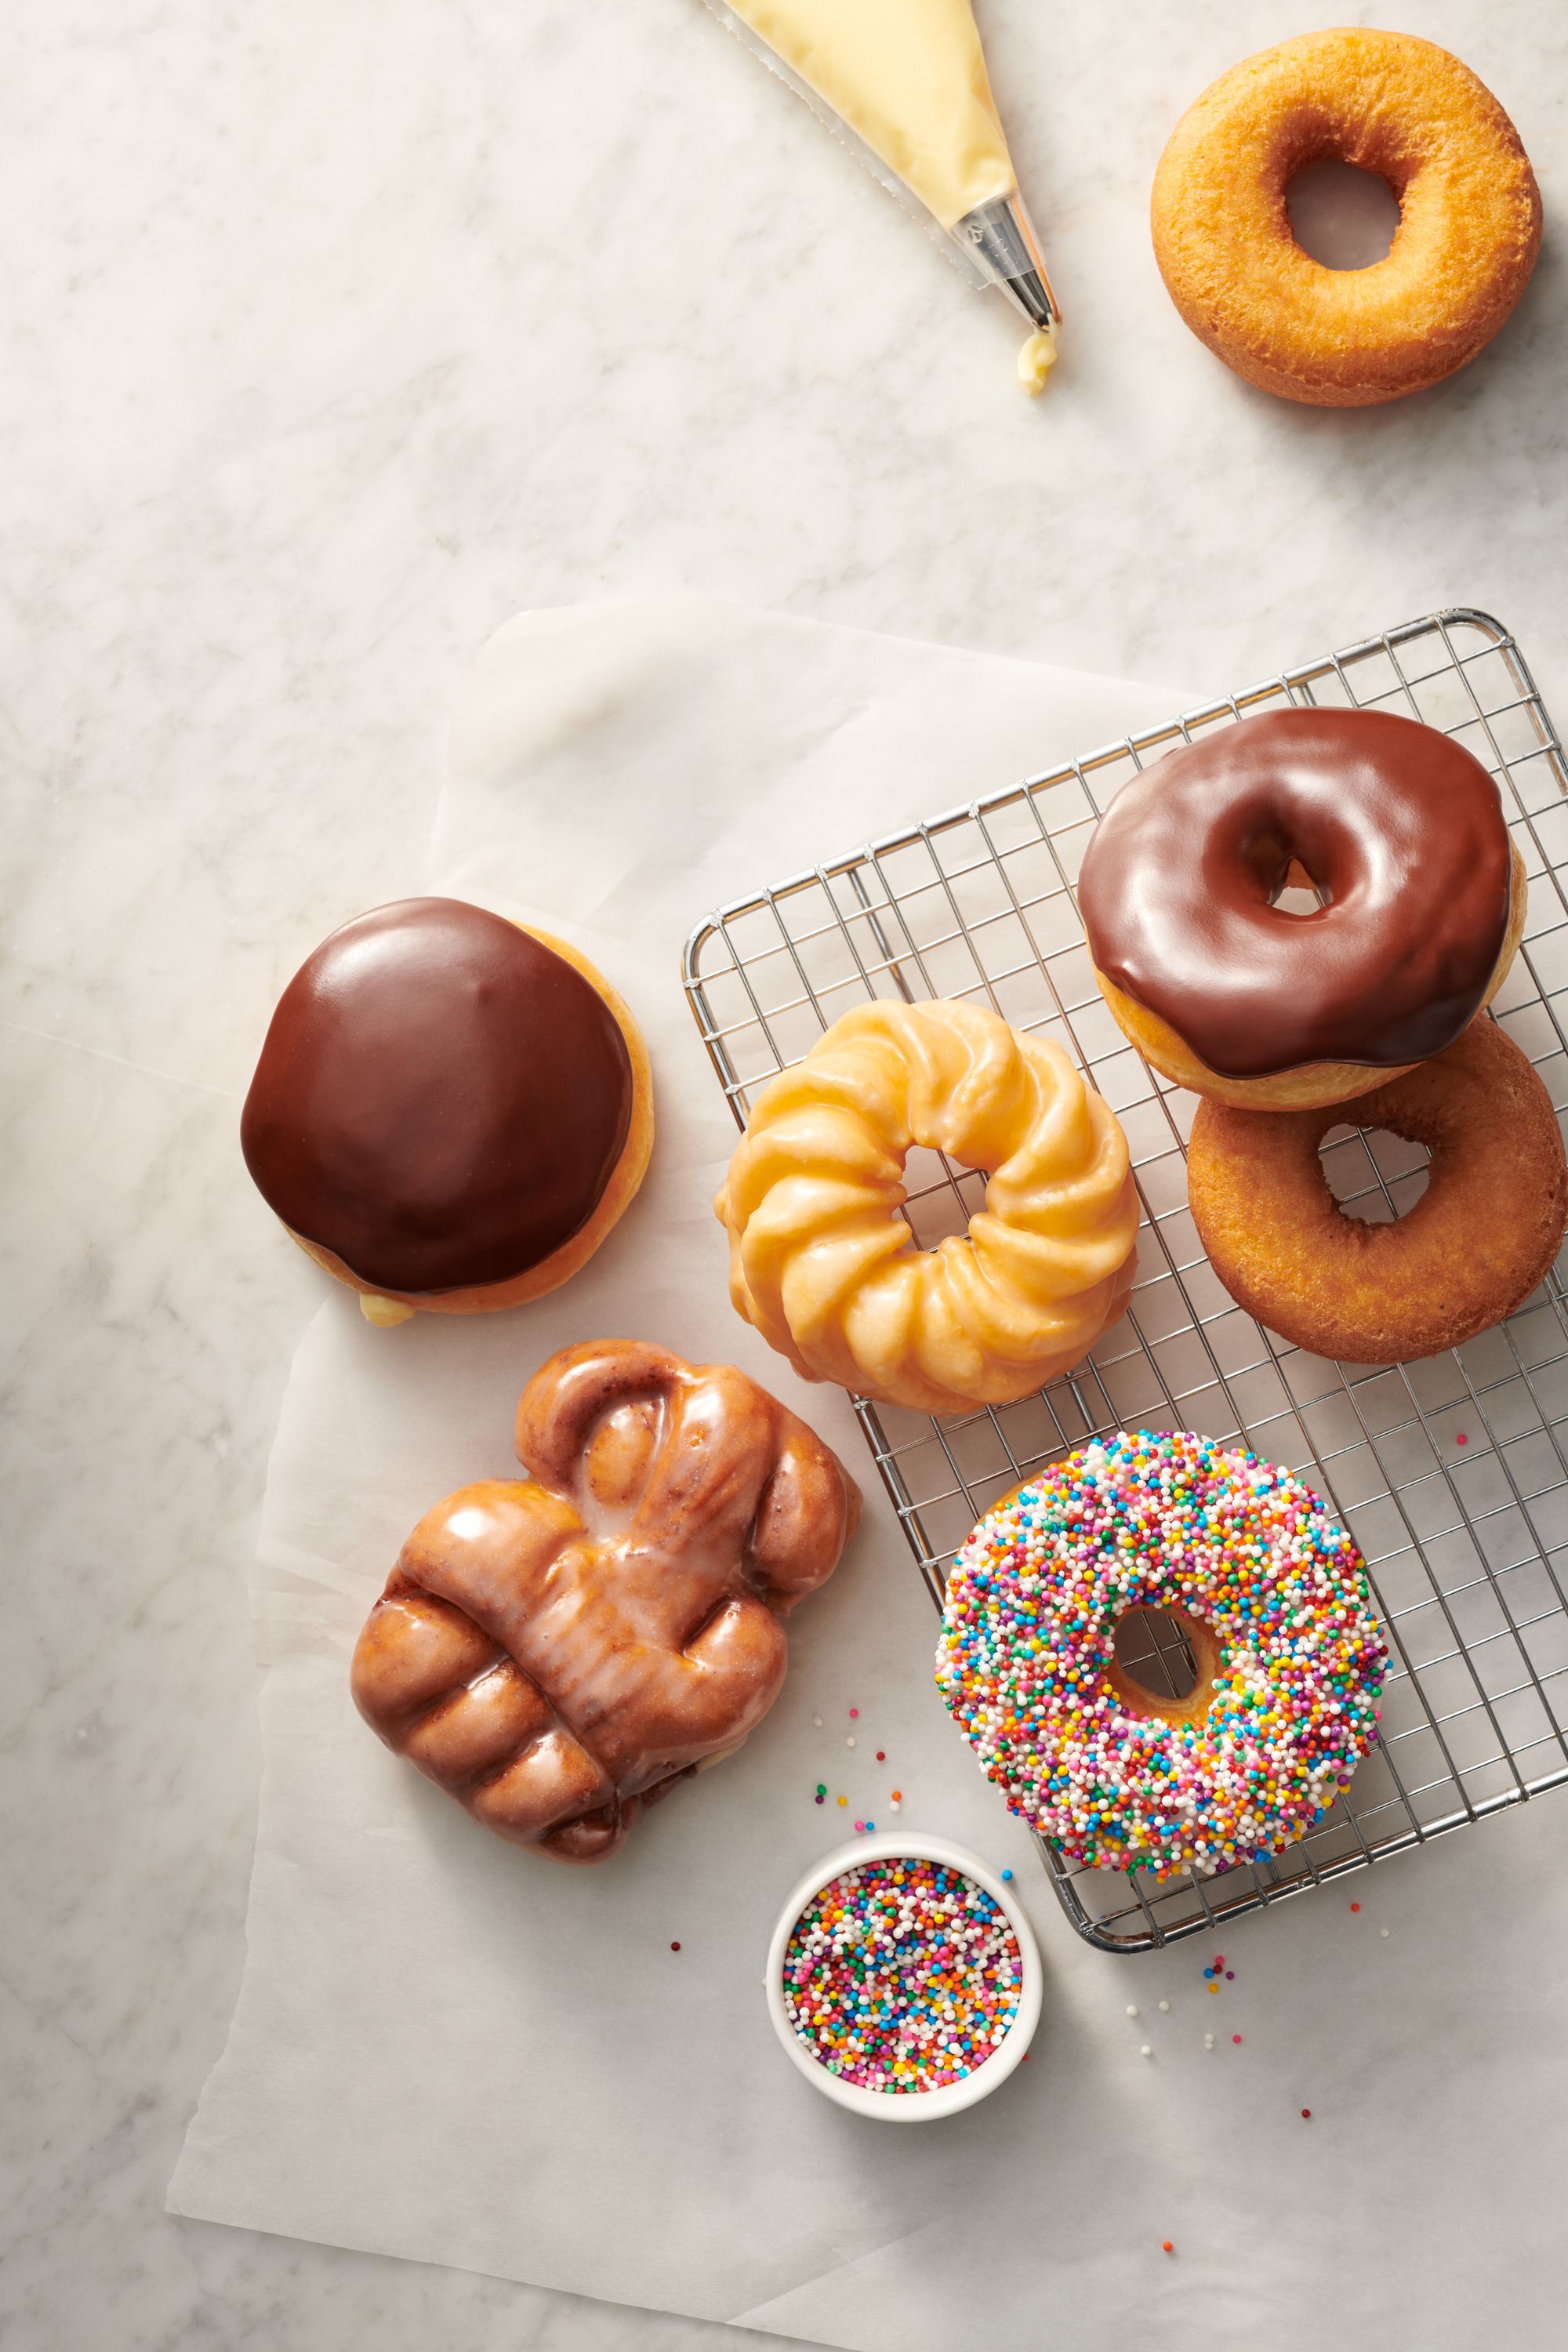 Tim Hortons relaunches two of Canada's favourite donuts! Introducing the  new Apple Fritter and Boston Cream, with over 40% more apples and over 33%  more filling